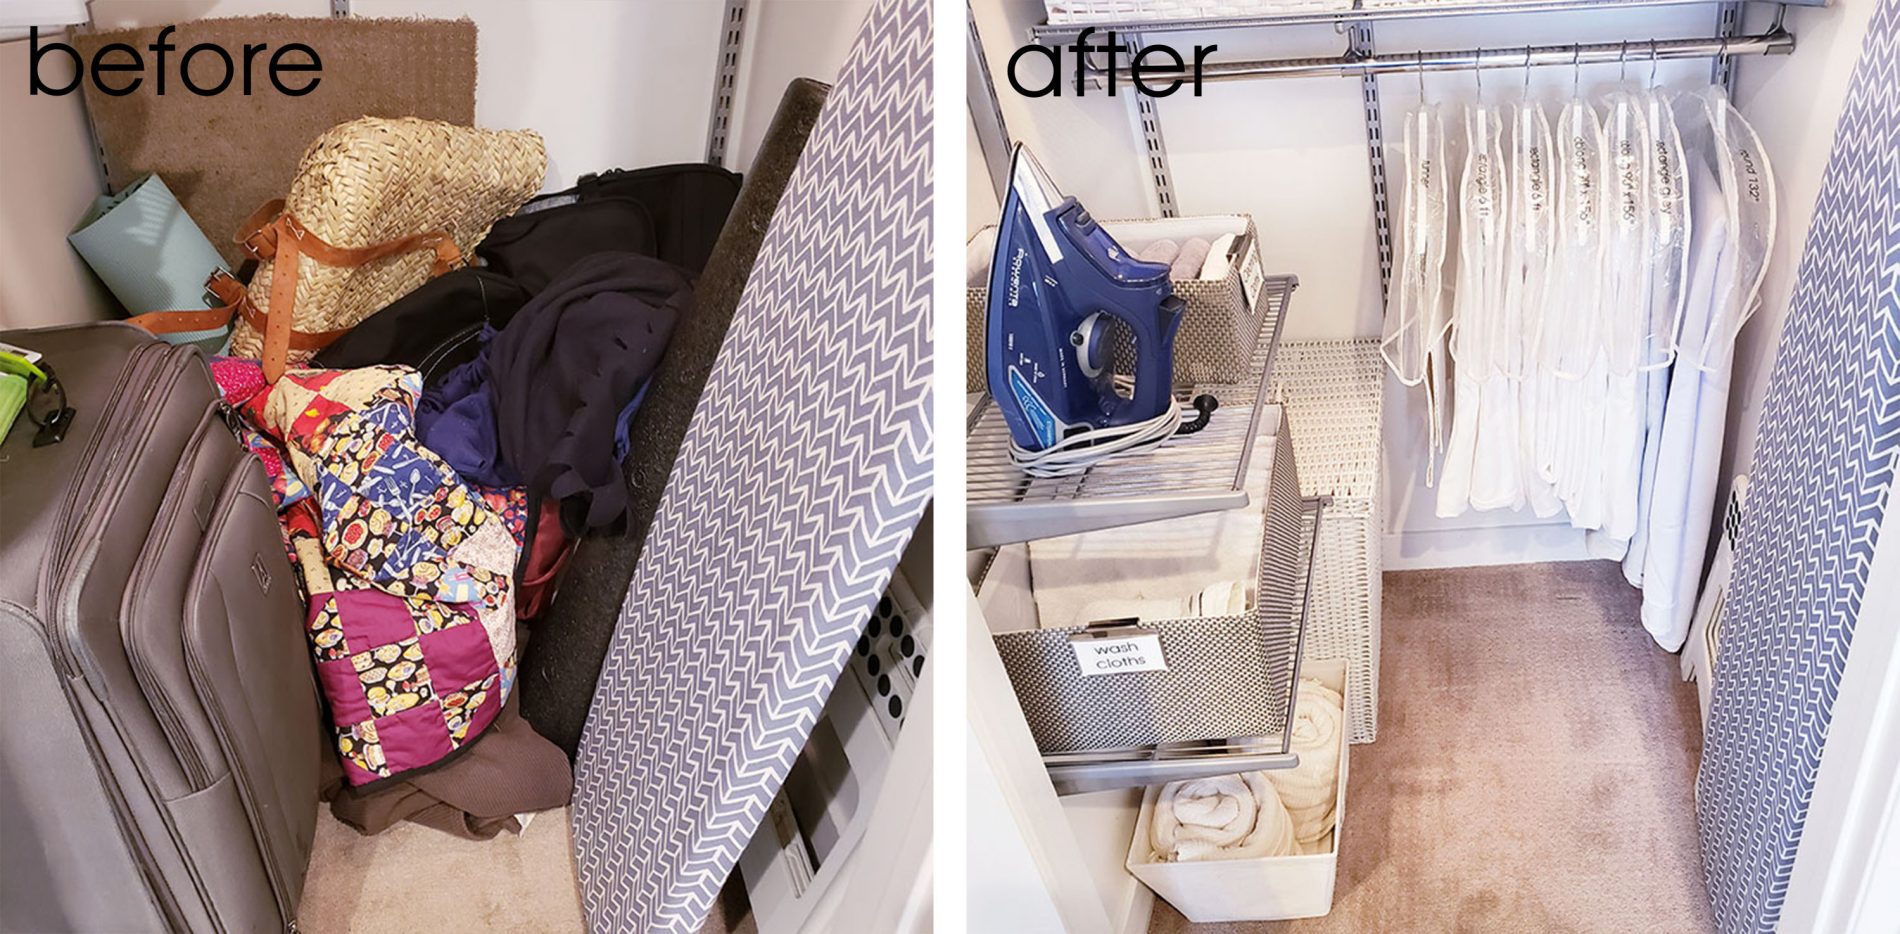 Before and after photos of how to organize your linen closet.